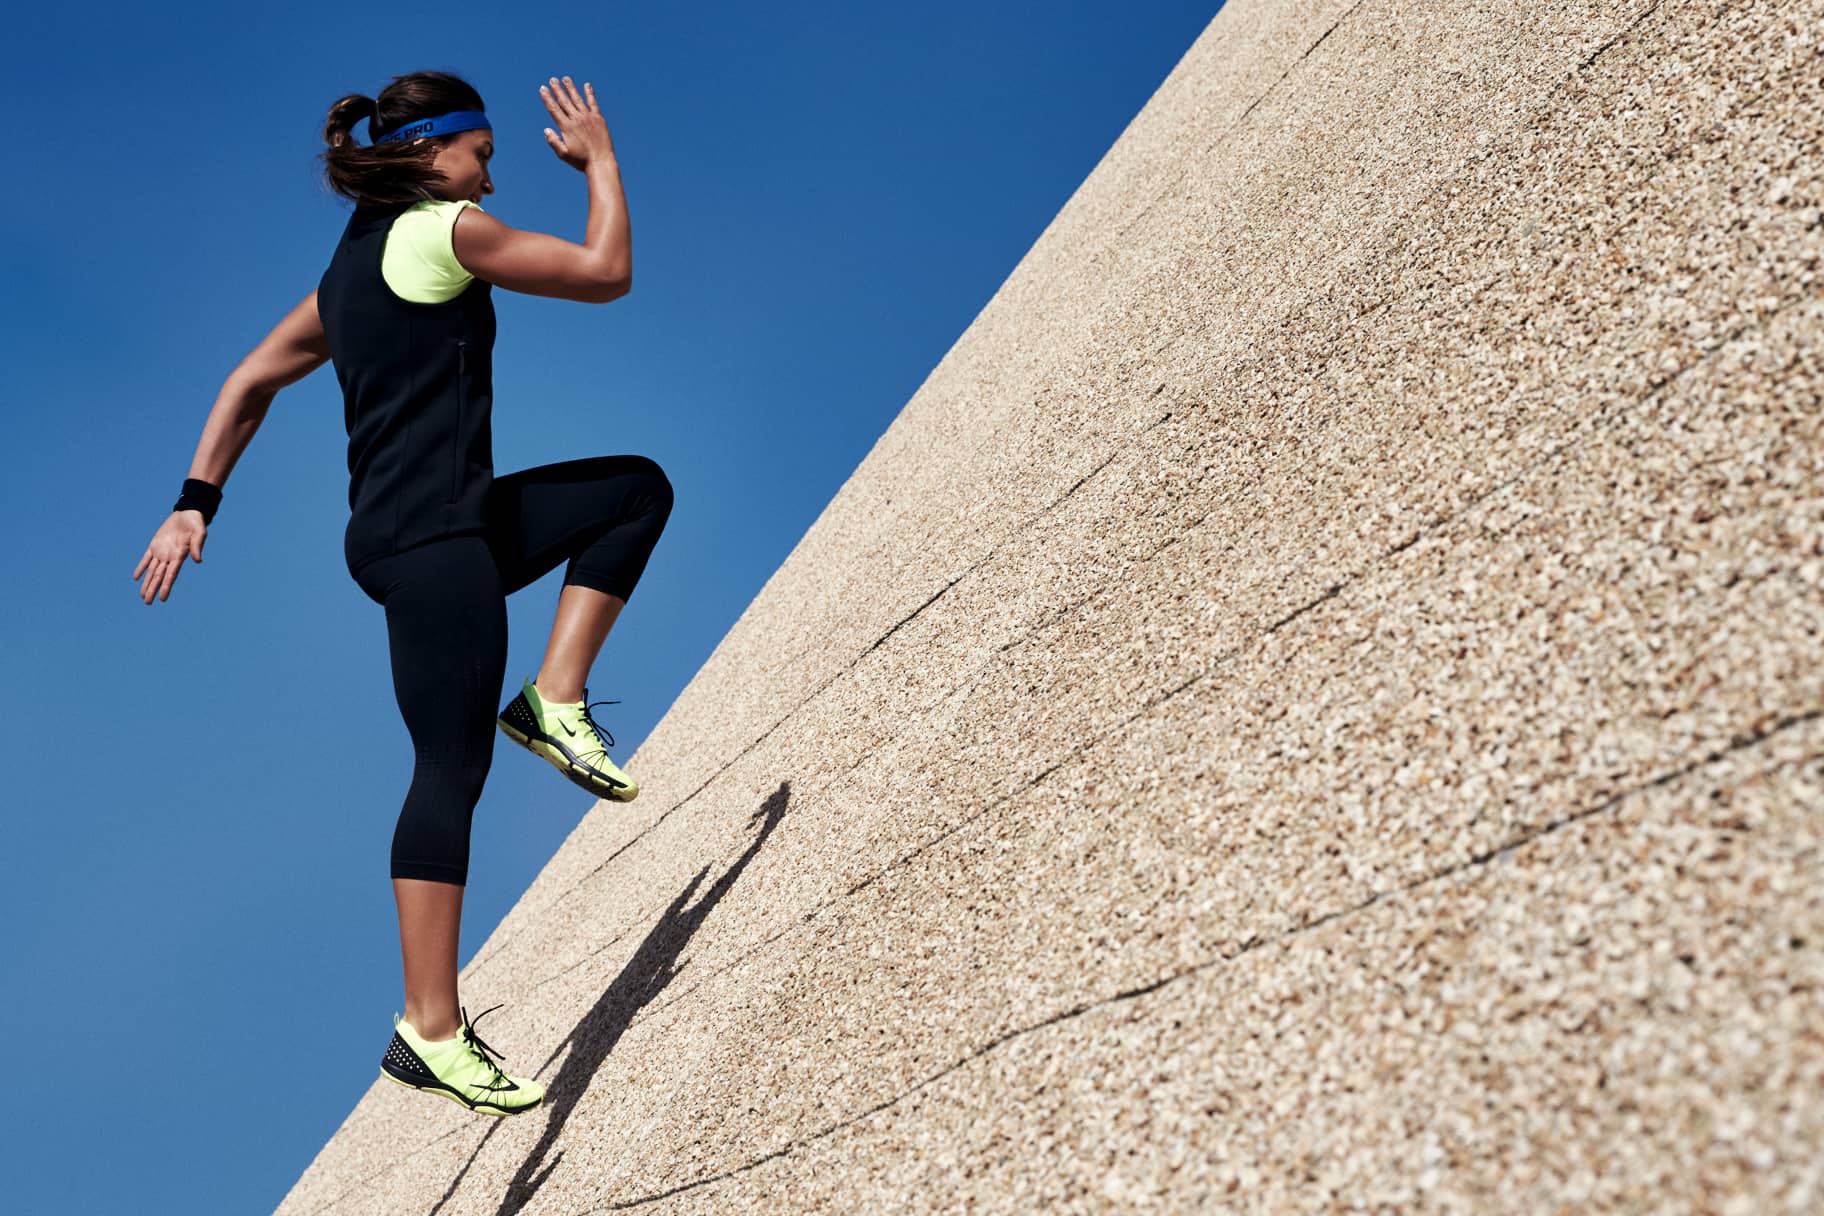 4 Powerful Hill Workouts That Provide Major Benefits